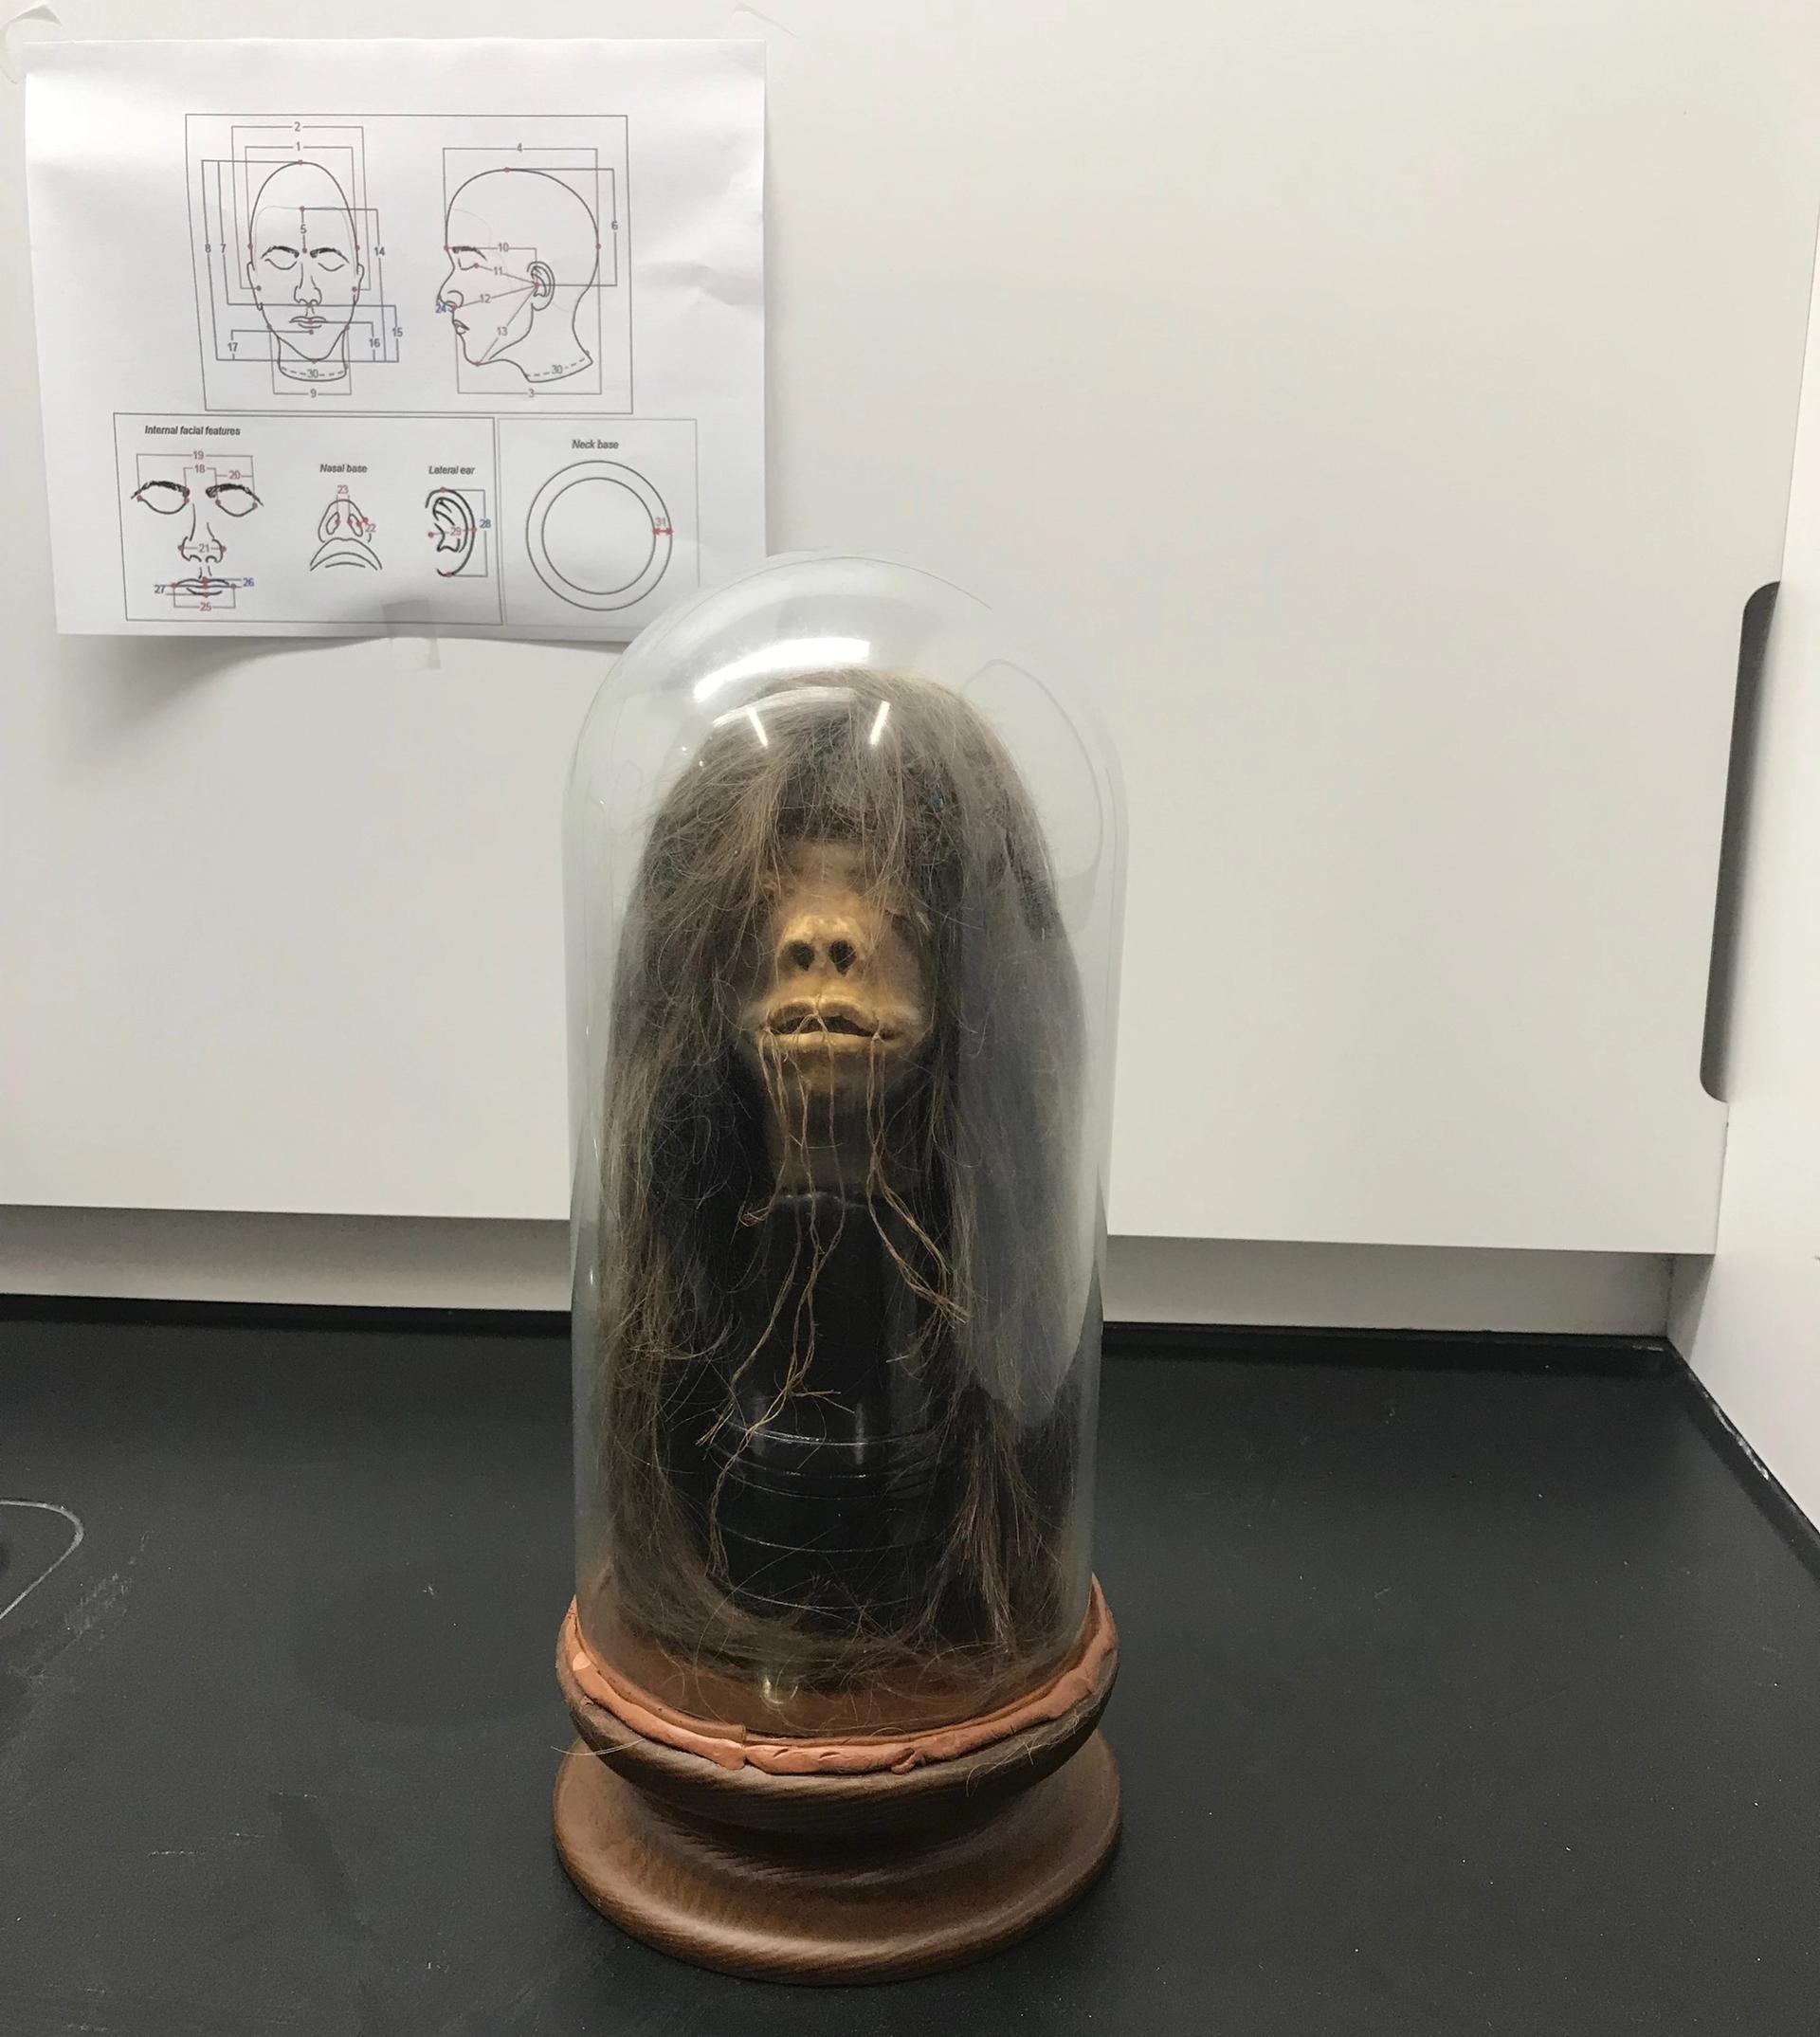 The tsantsa had been in the Mercer University natural history collection in Macon, Georgia, and was brought to the US from Ecuador by a now dead faculty member during the Second World War Photo: Adam Kiefer